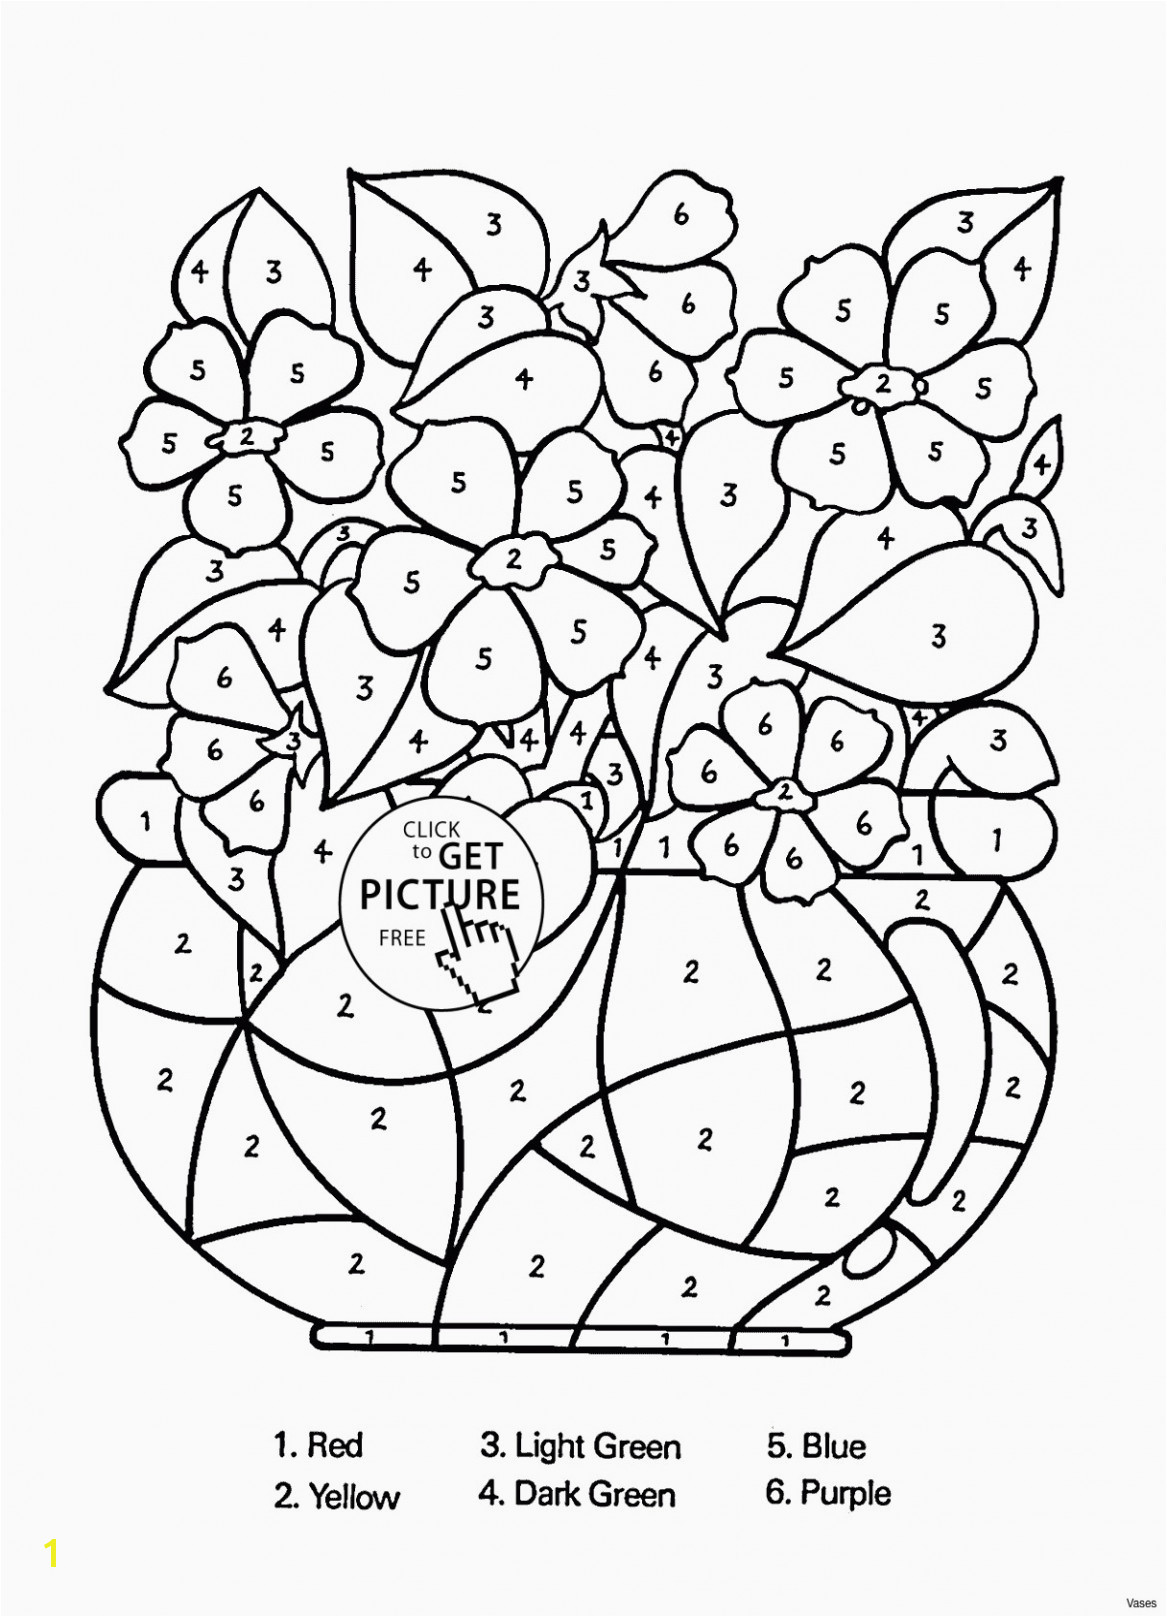 Coloring Page Of A Volcano Volcano Coloring Pages